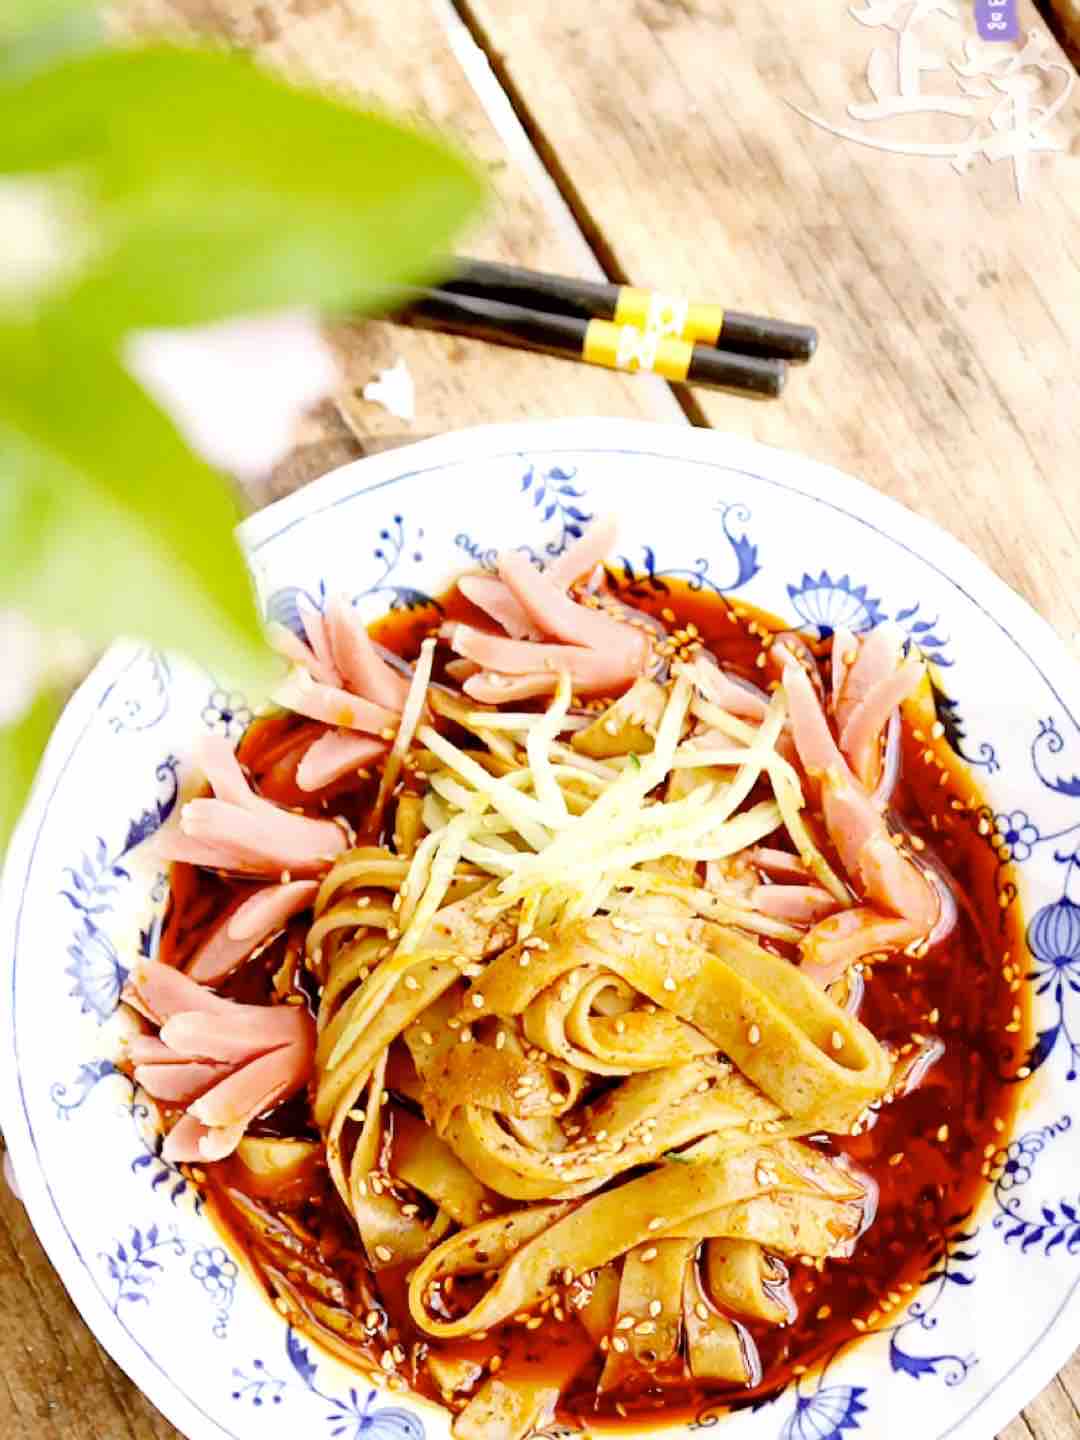 Naked Oat Noodles with Red Oil recipe